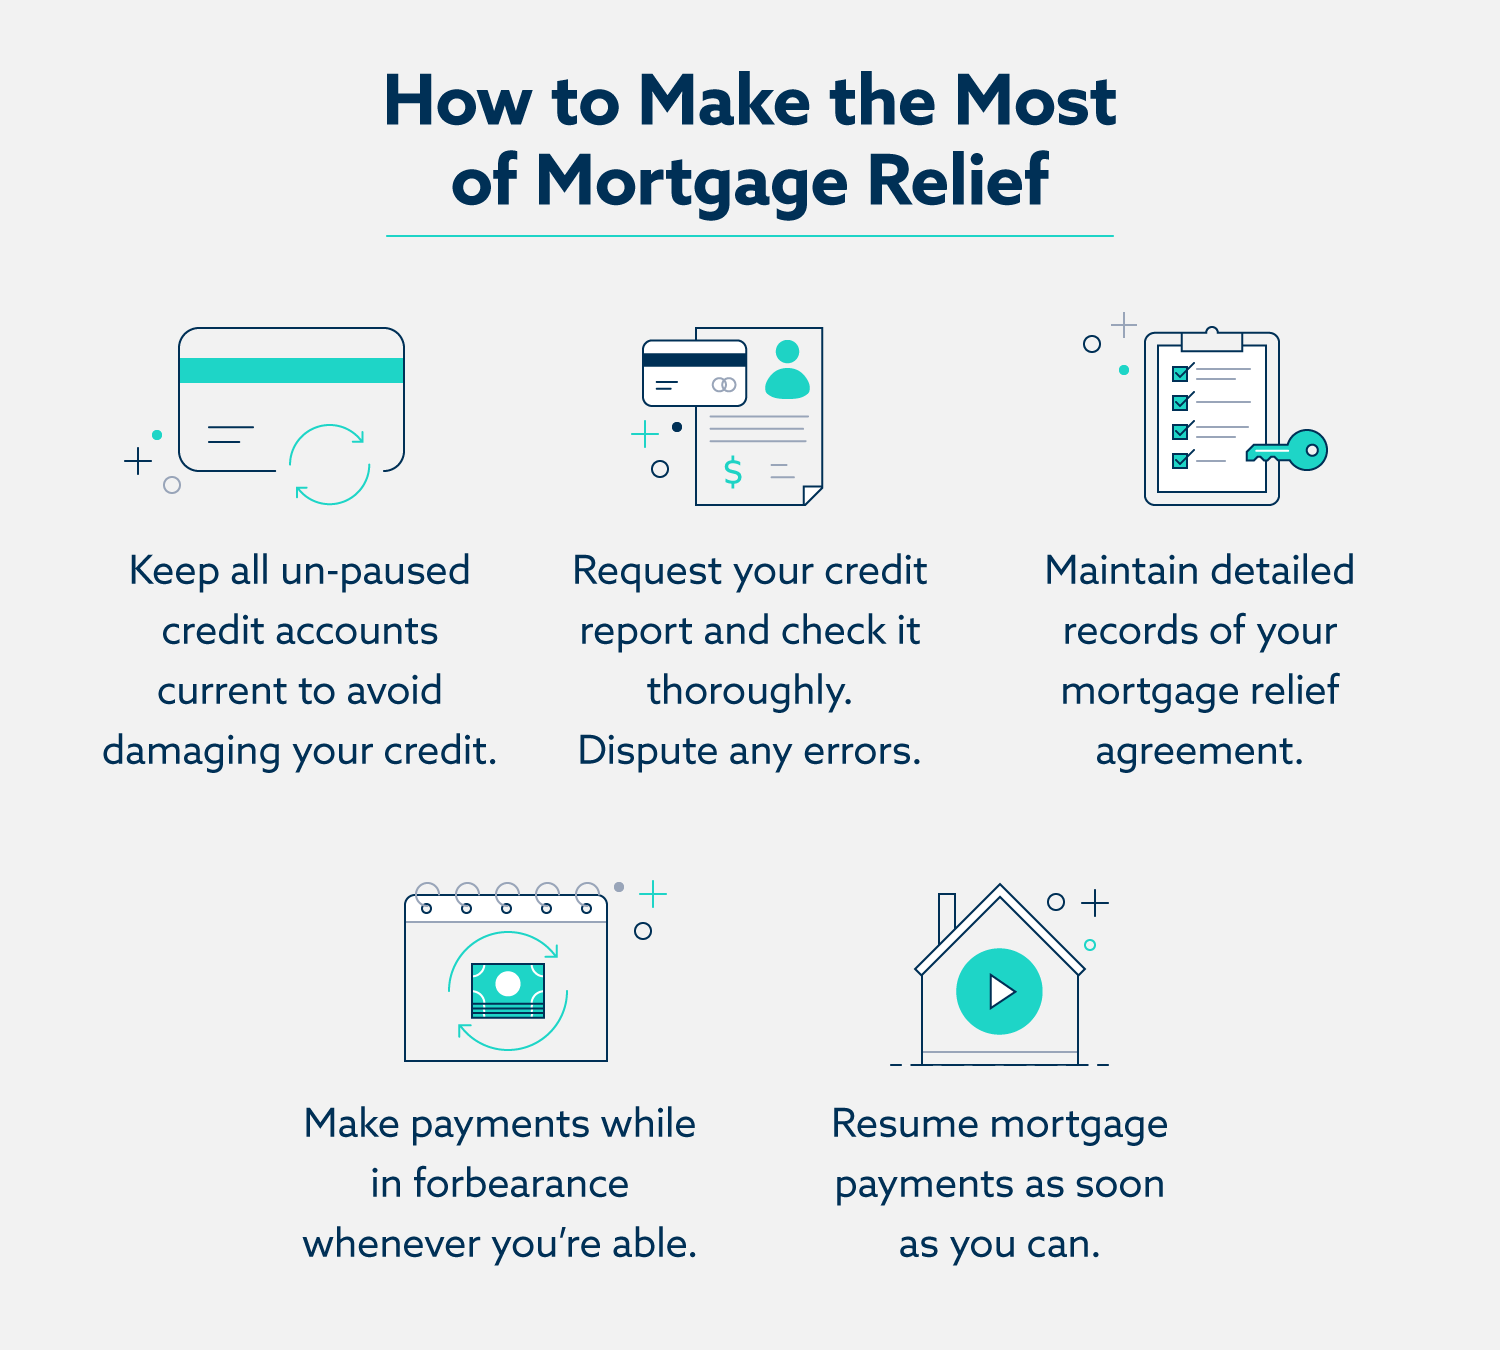 How to Make the Most of Mortgage Relief